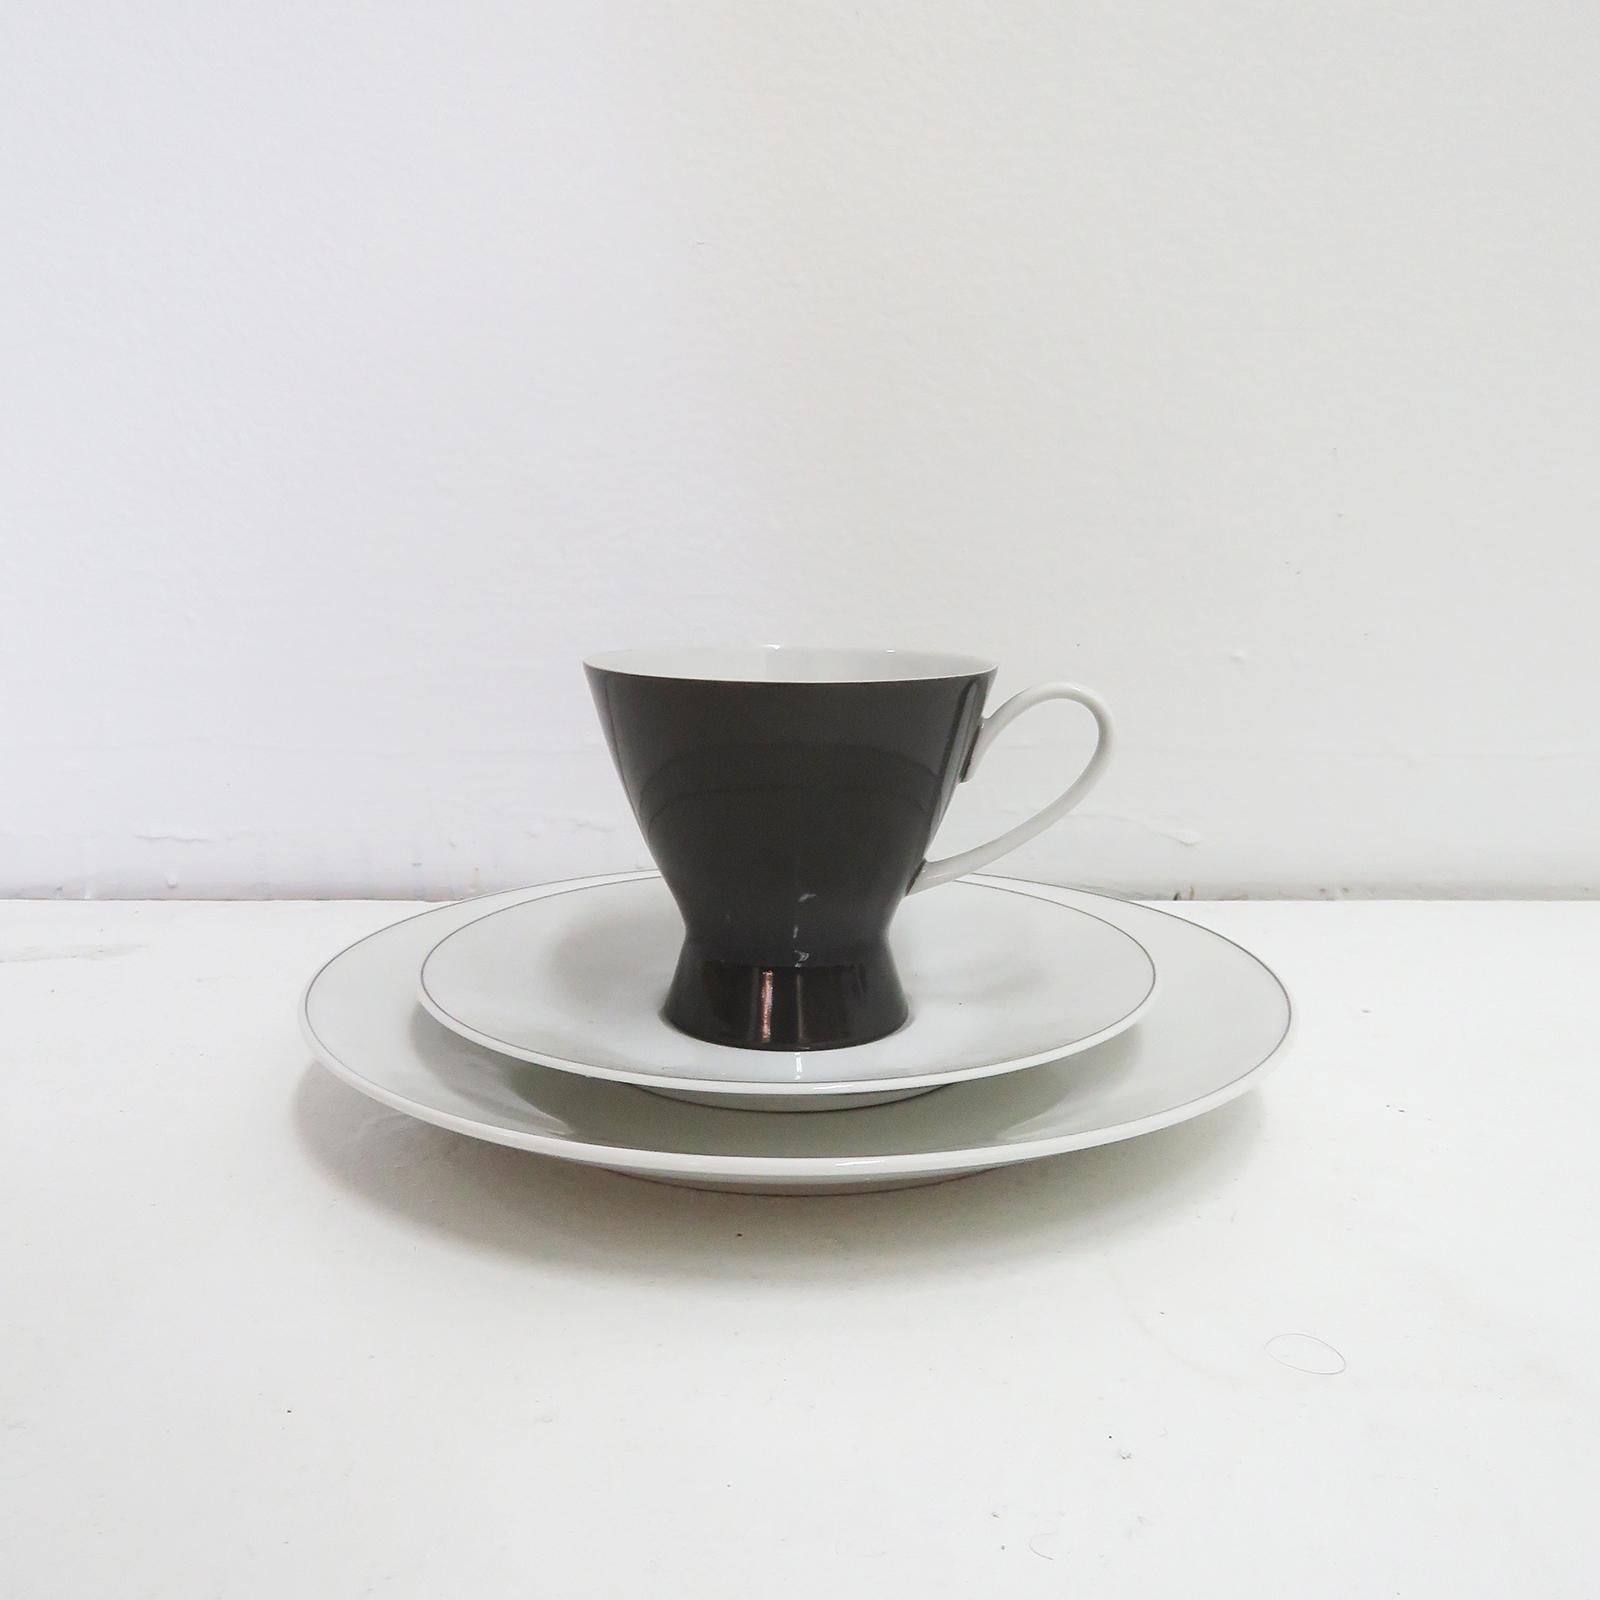 German Raymond Loewy After Dinner Coffee Set for 